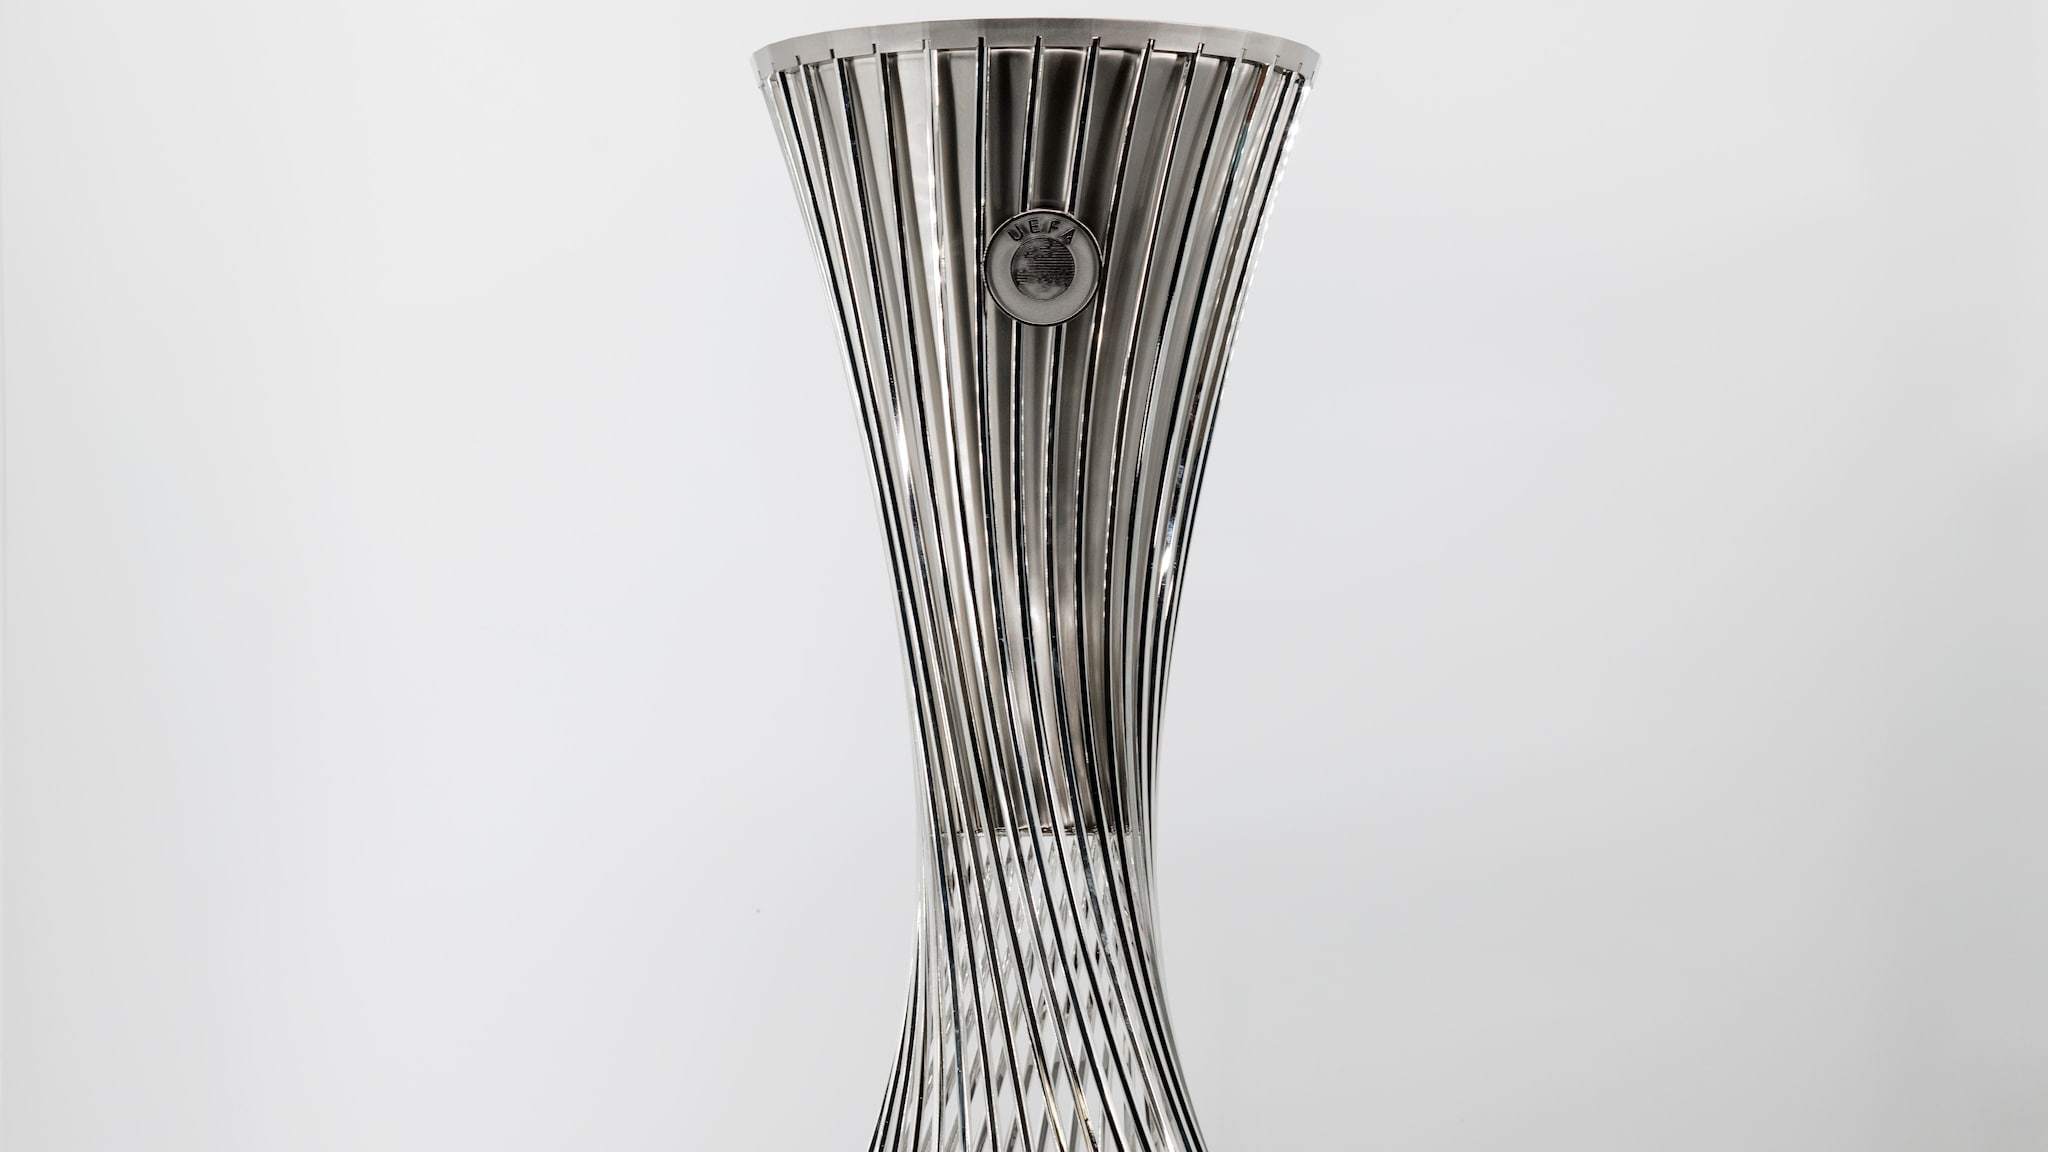 UEFA Europa Conference League trophy unveiled | UEFA Europa Conference